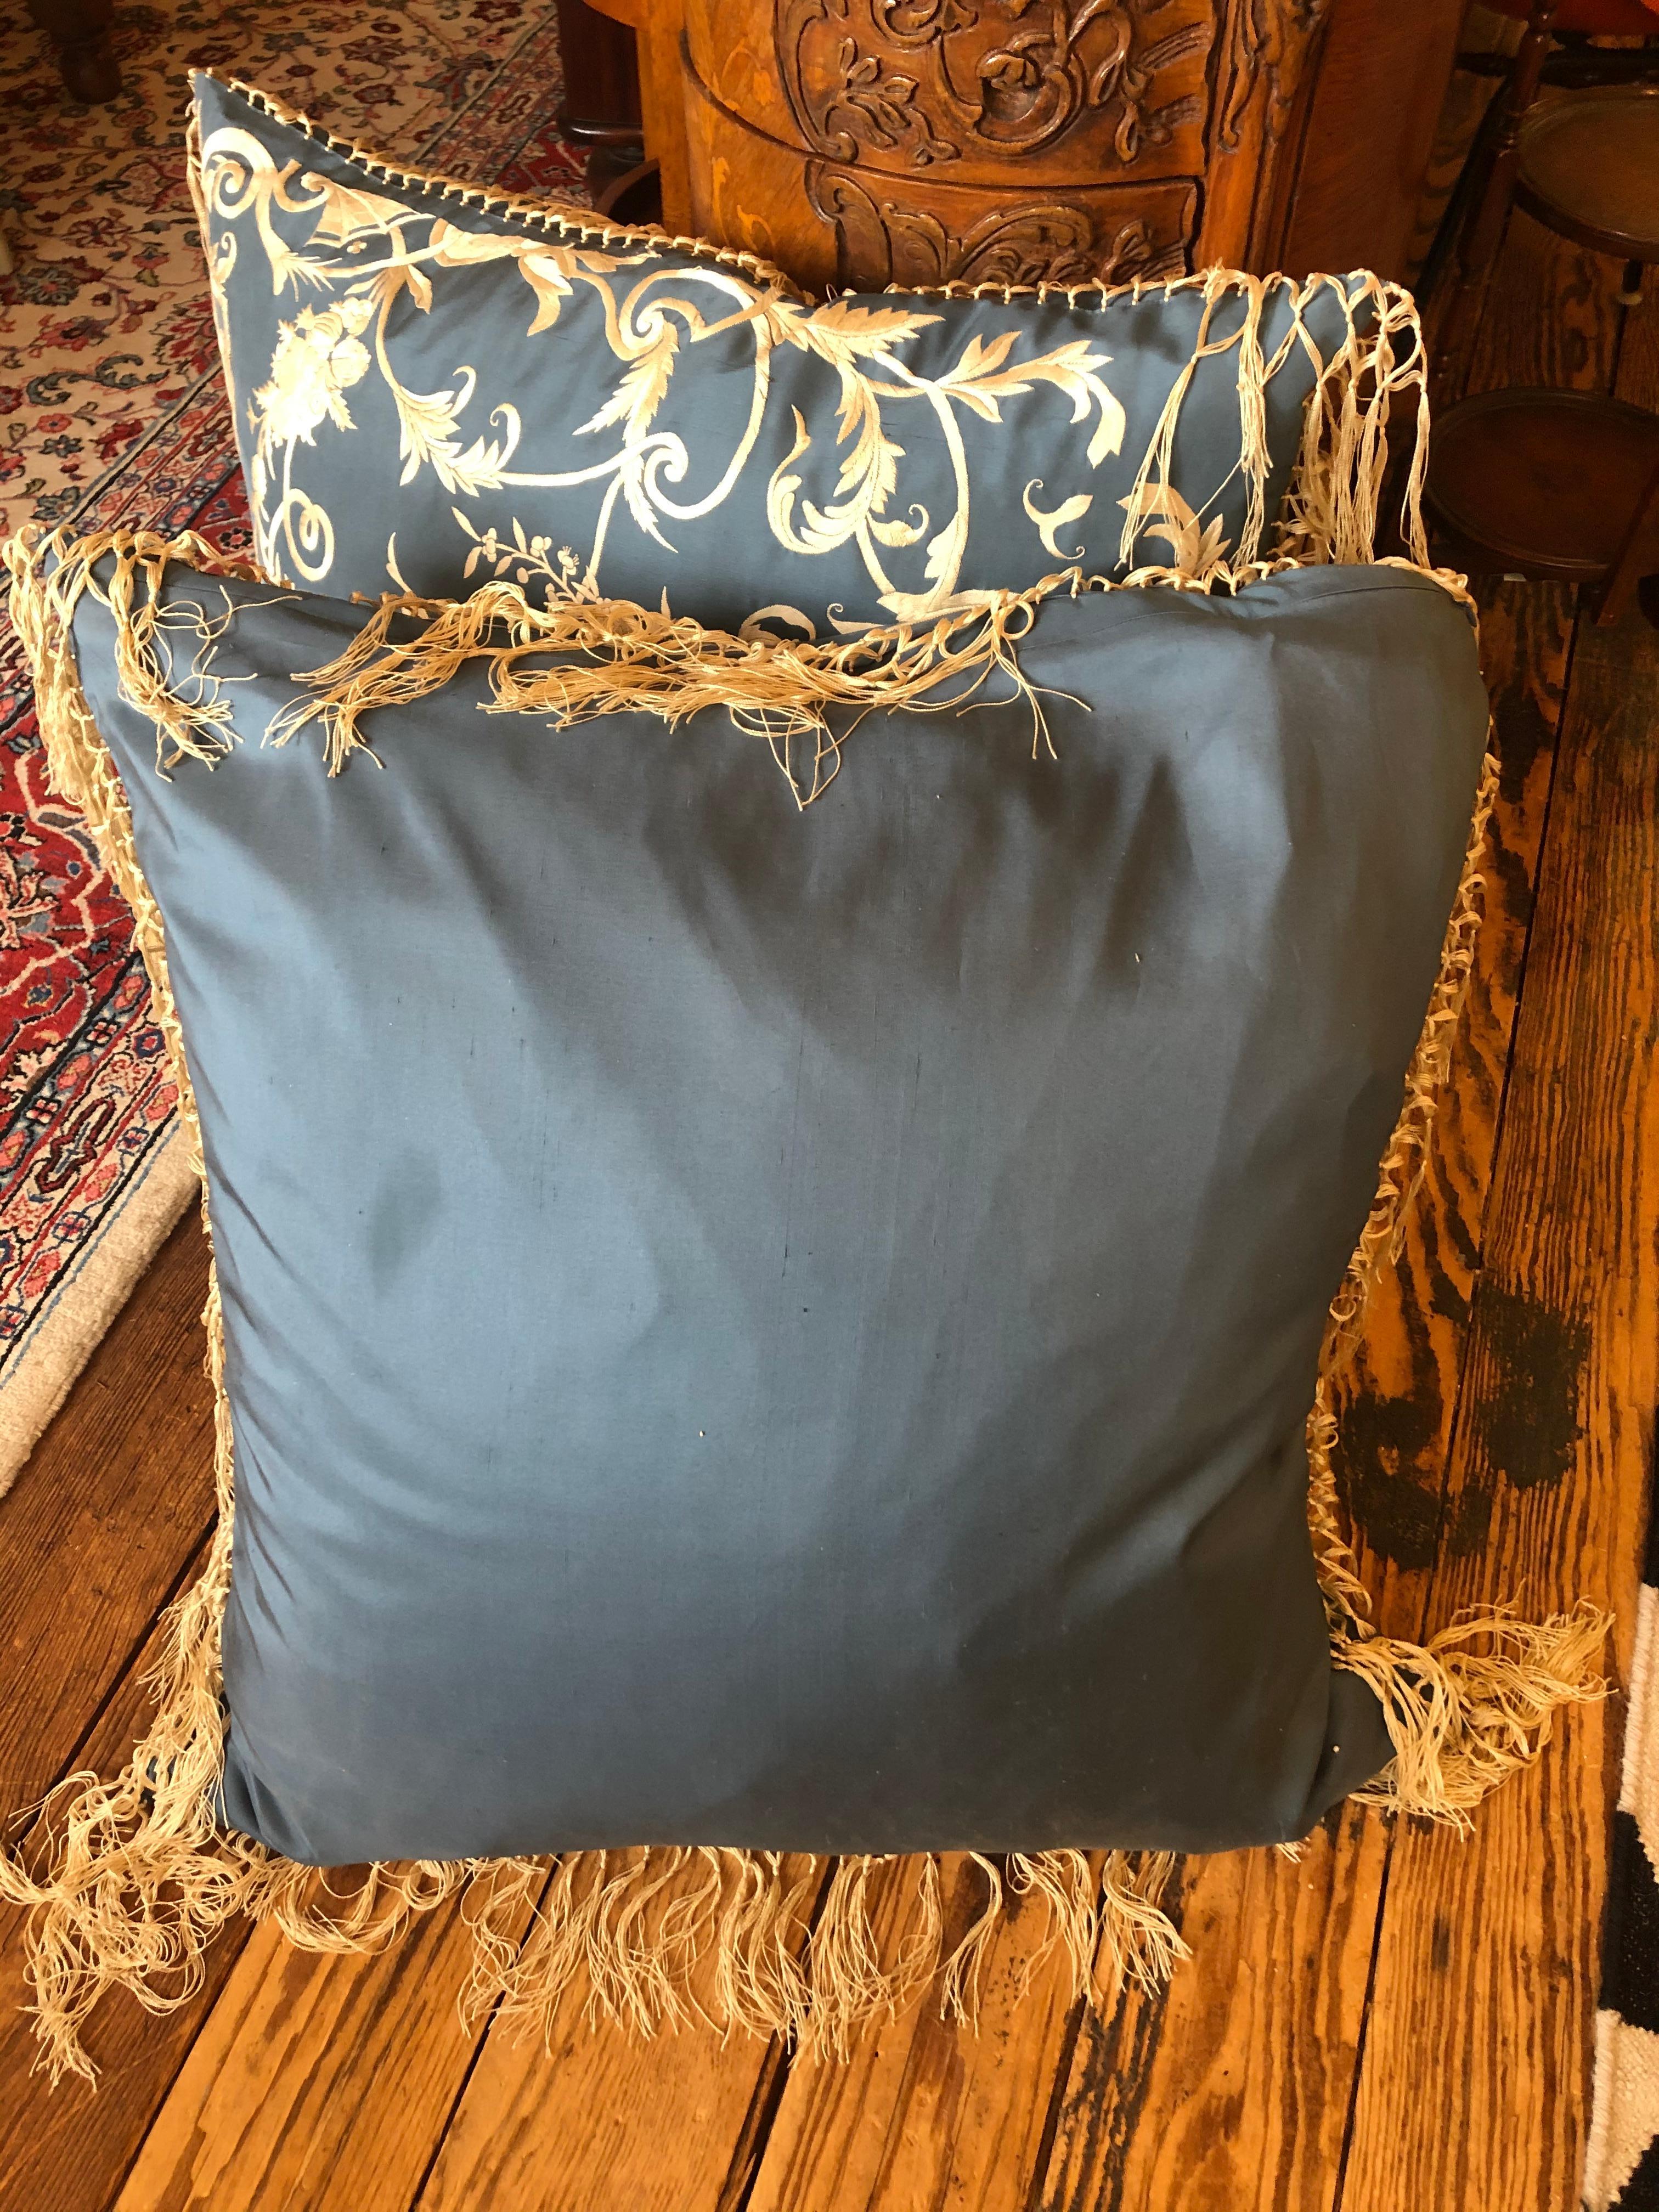 A sumptuous down filled silk pillow by Ralph Lauren in a soothing shade of periwinkle blue with cream embroidery and fringe.